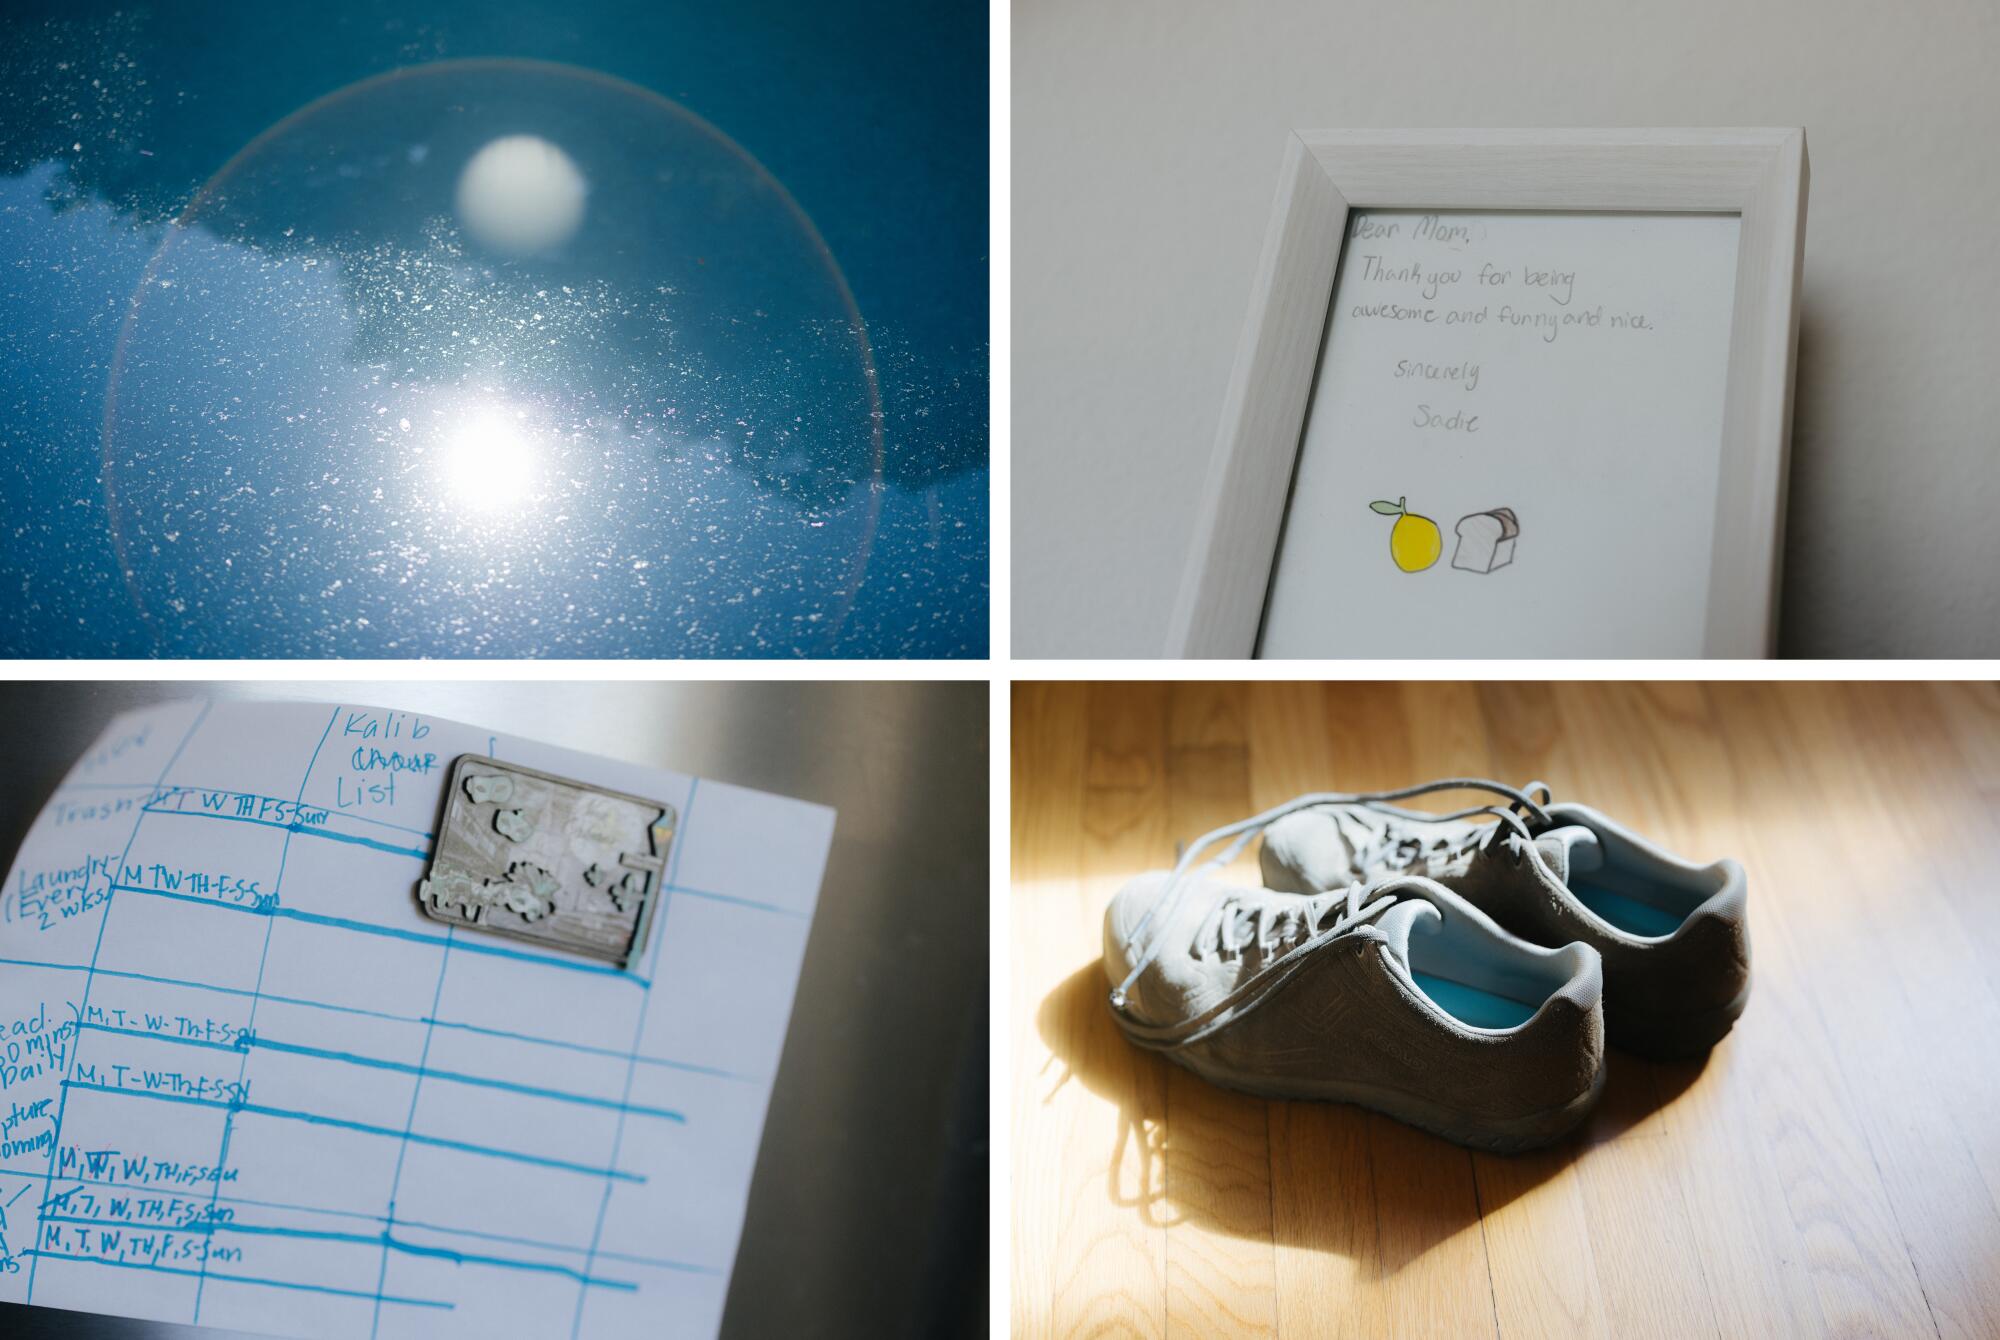 A grid of four photos shows a pool, a handwritten note, a handwritten calendar and a pair of blue sneakers